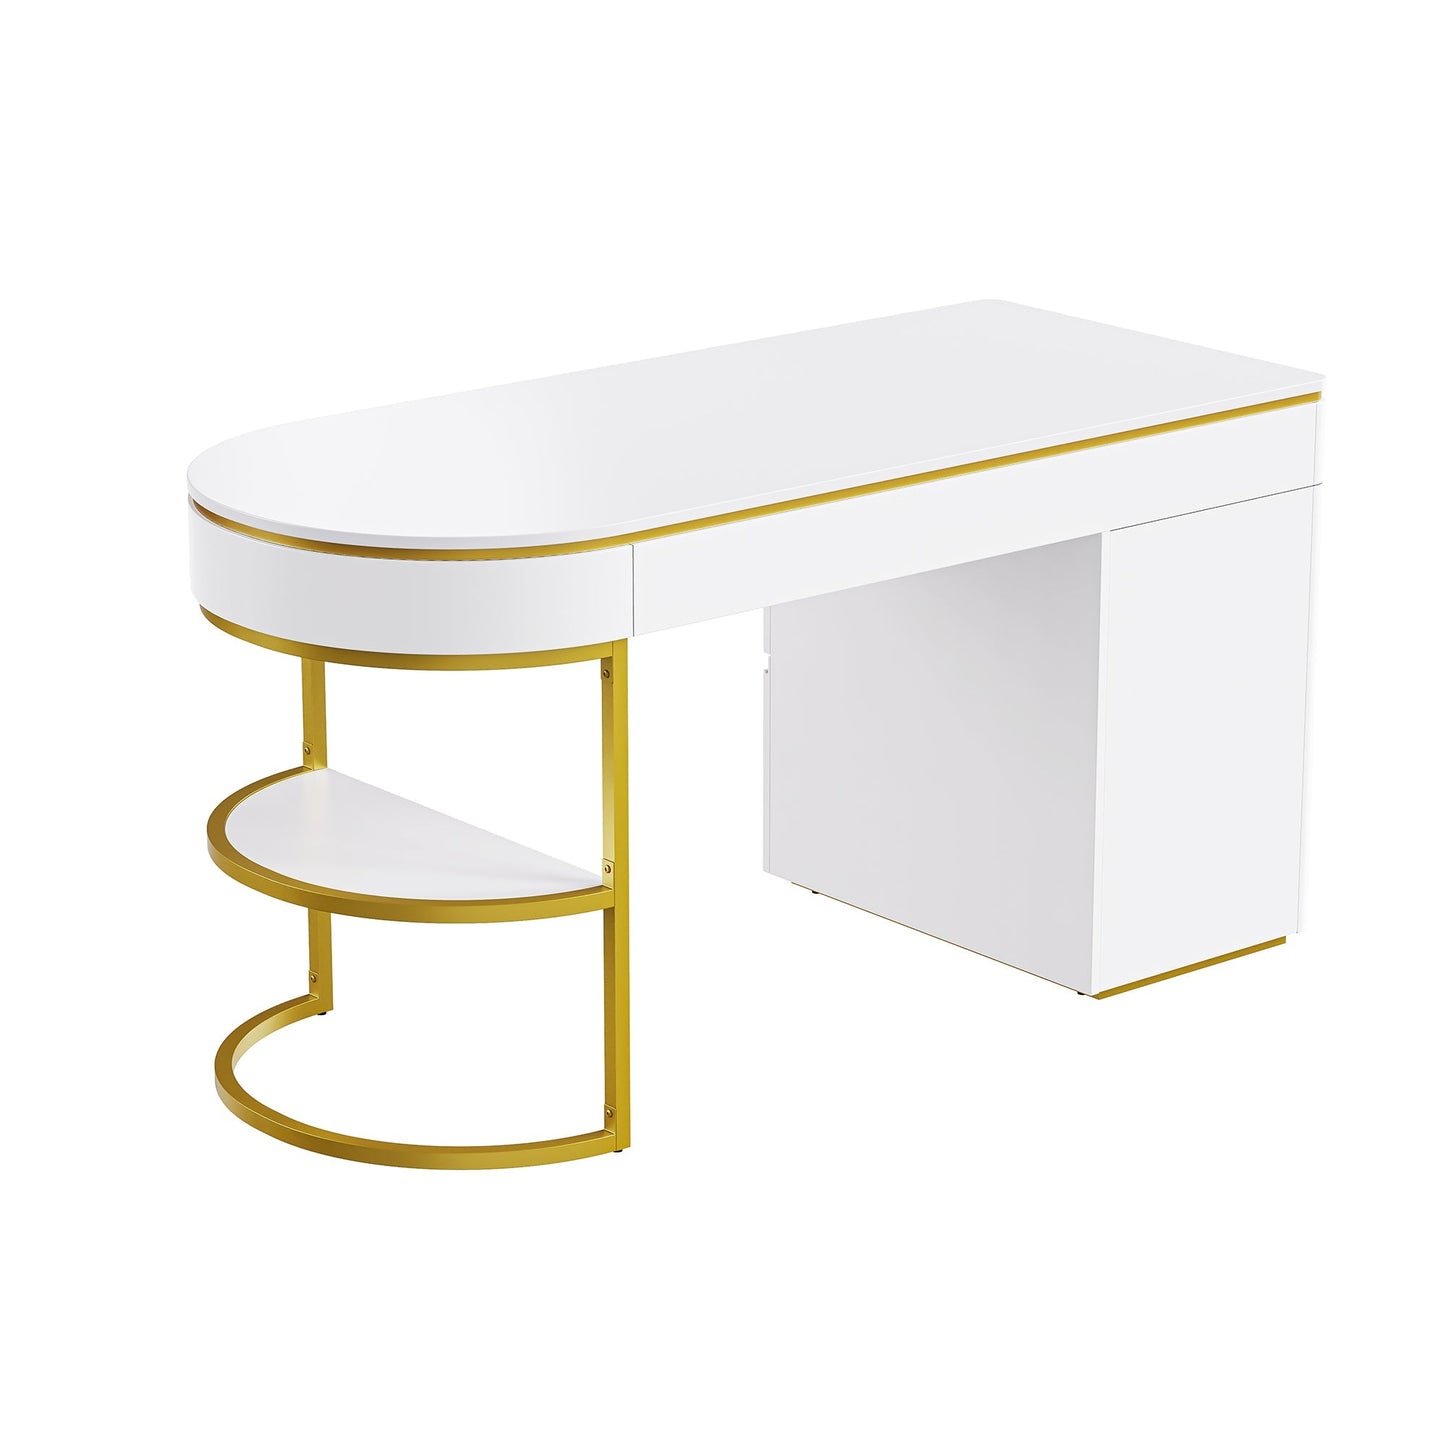 60''Modern Executive Desk,White Curved Computer Desk with Gold Metal Legs,3-Drawers Home Office Desk,Writing Desk with 1 Storage Cabinet for Home Office,Living Room,Gold+White